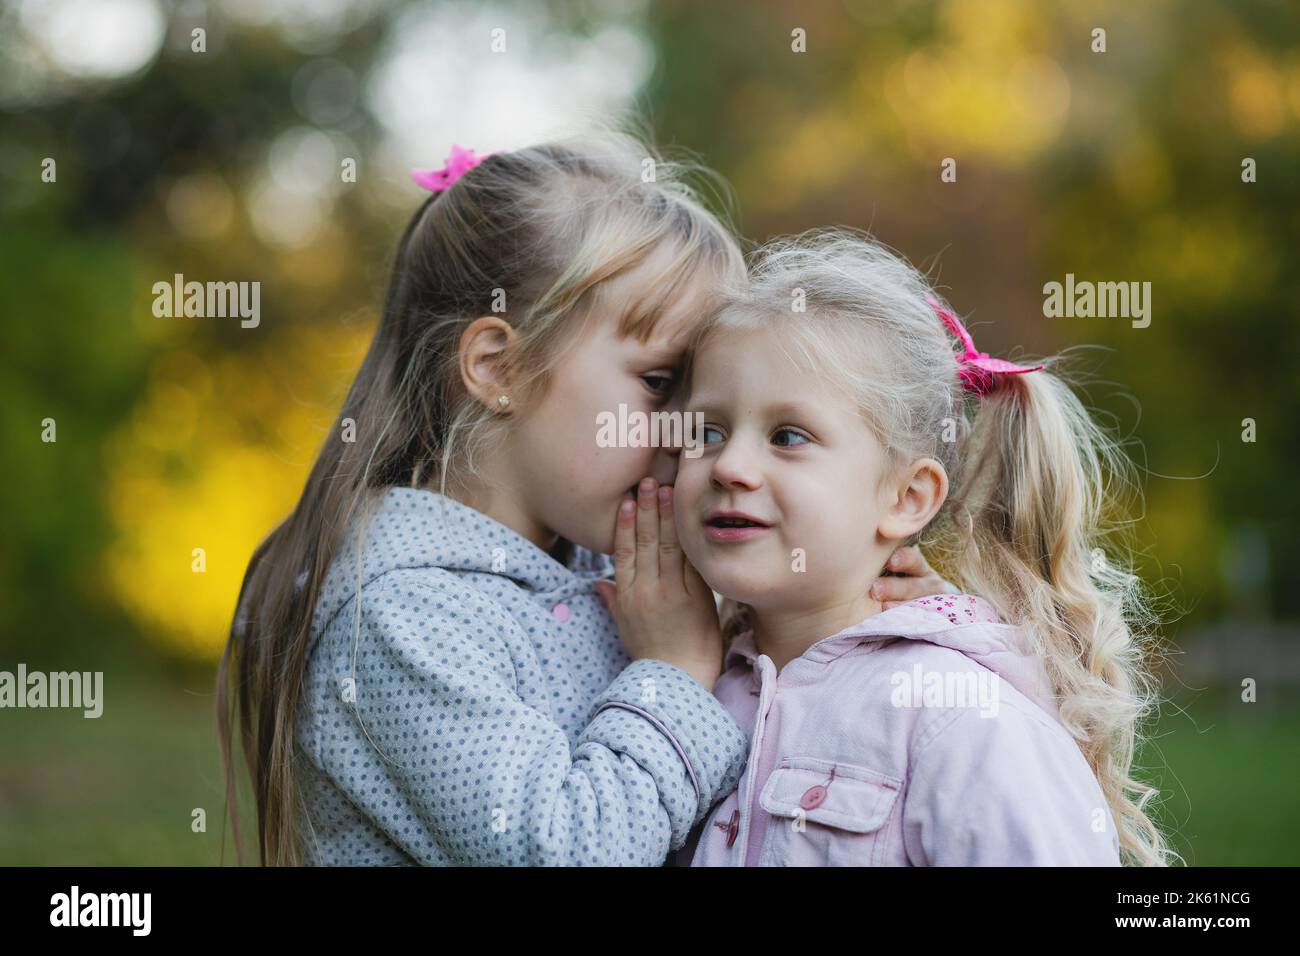 A little girl tells the secret in her friend's ear. Two cute baby girls in the autumn park. Stock Photo